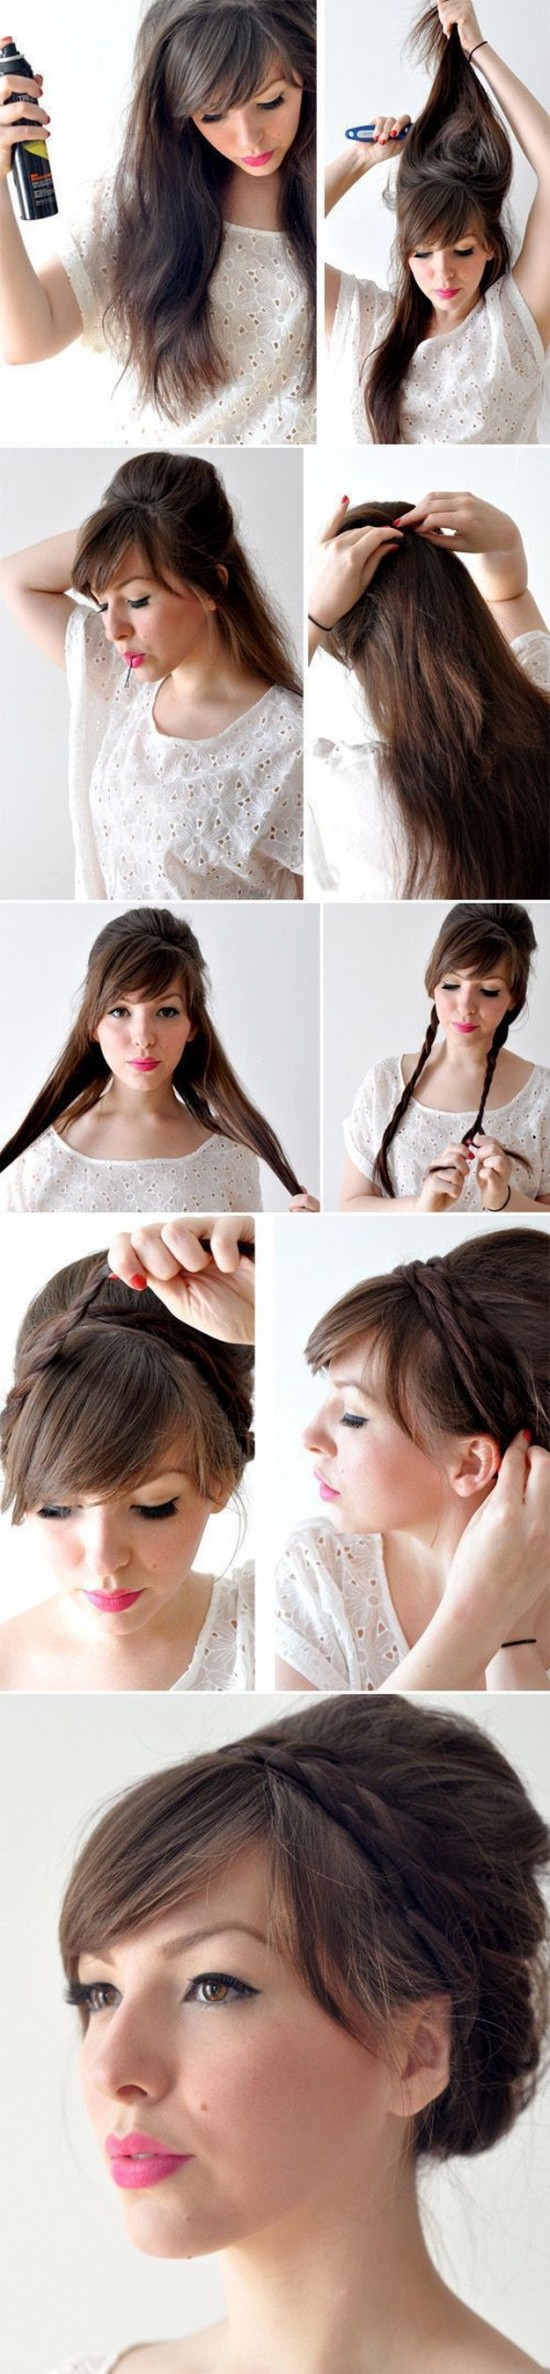 Creative-Hairstyles-That-You-Can-Easily-Do-at-Home-011